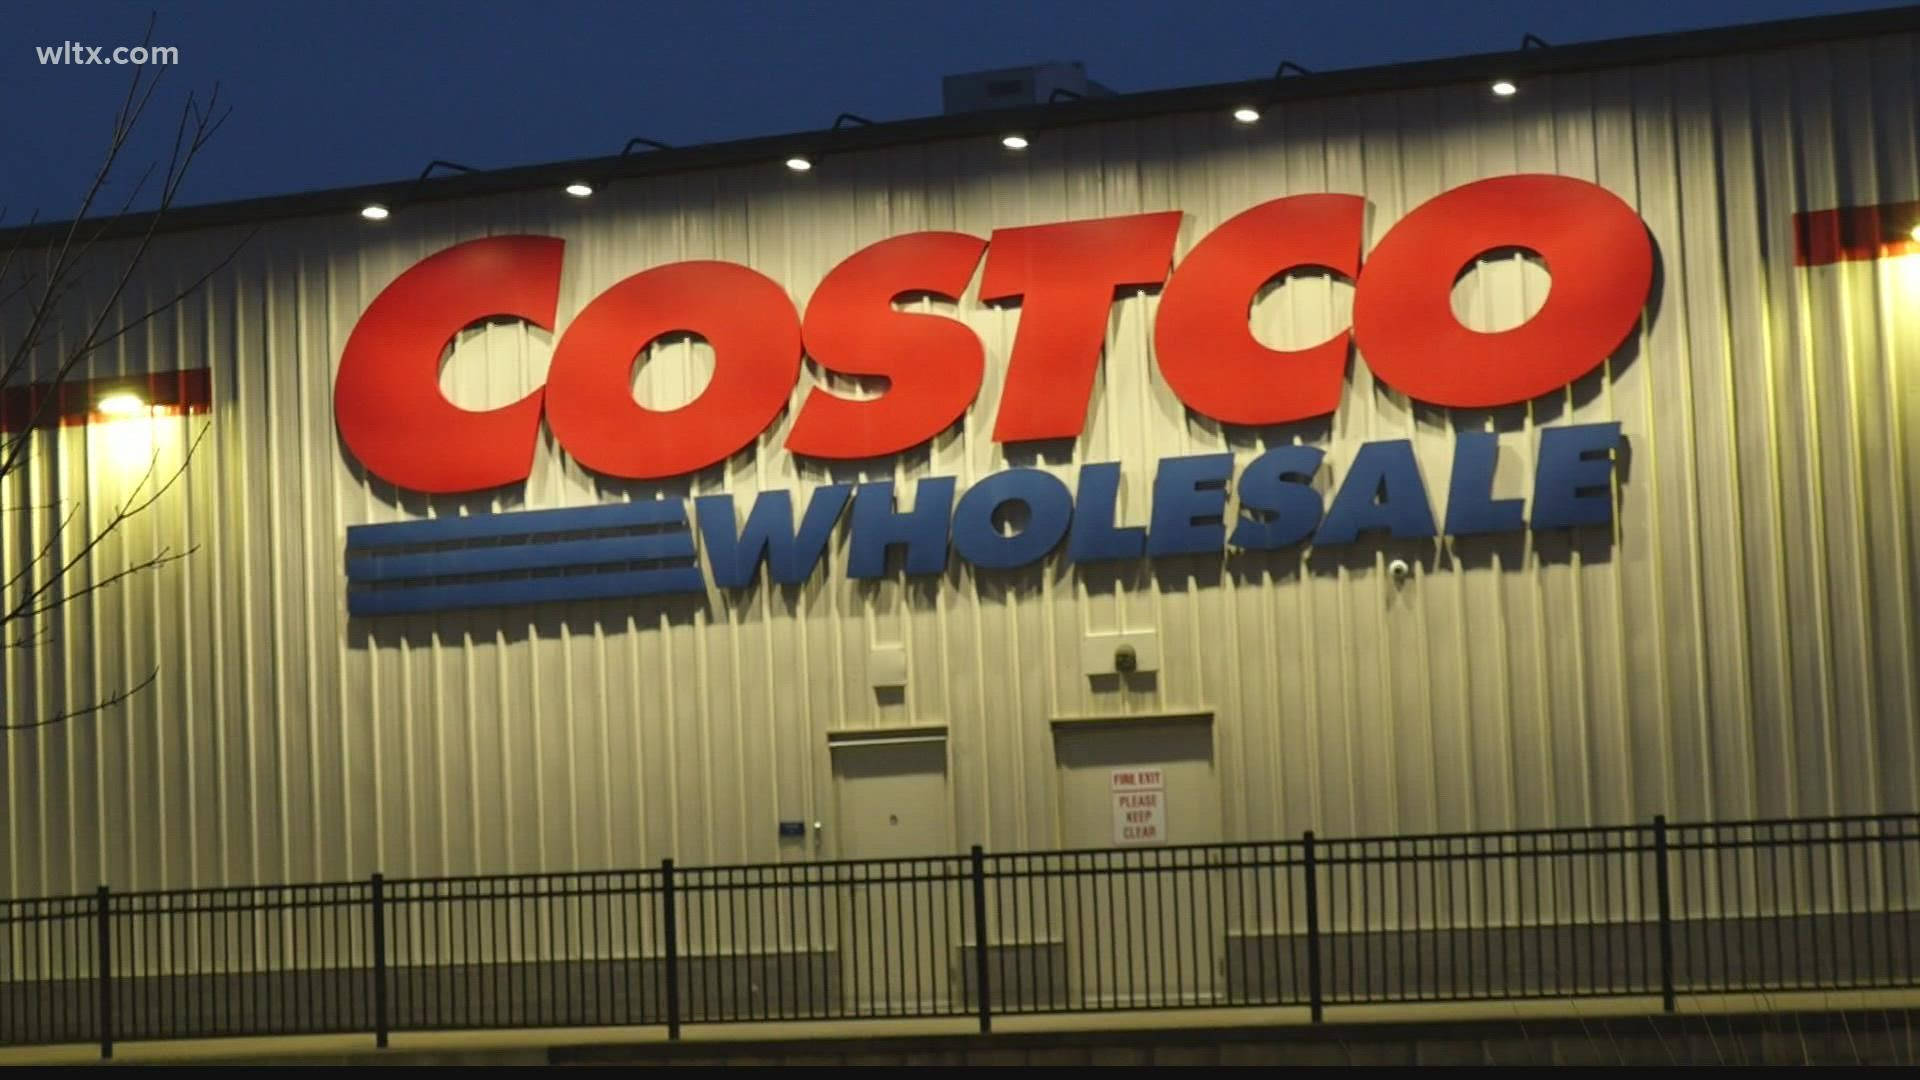 Costco Wholesale Signage With Lights Wallpaper